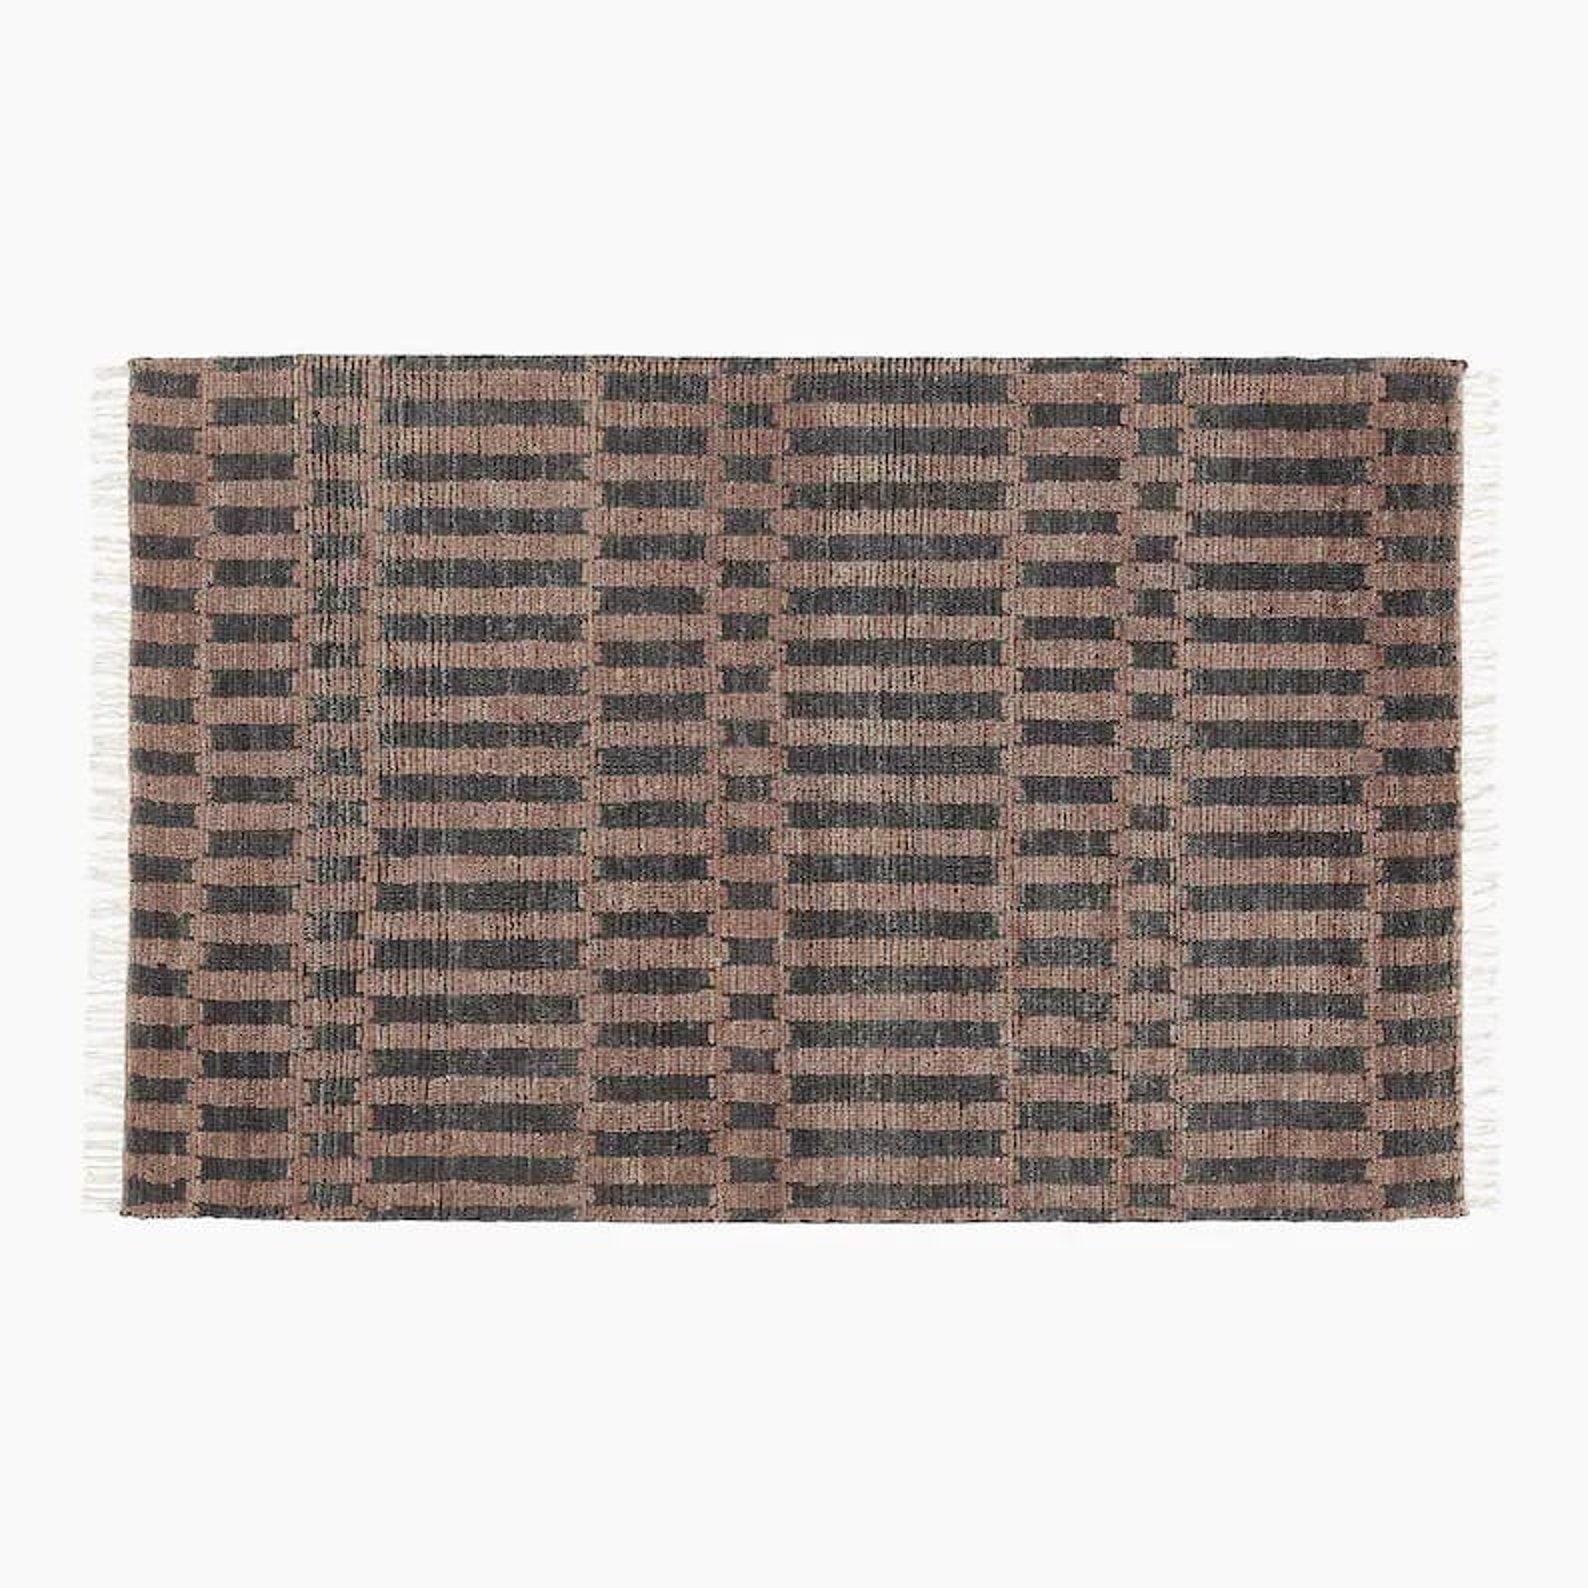 Black/brown Hand Knotted Area Rug 5x8 6x9 7x10 8x10 9x12 10x14 Large ...